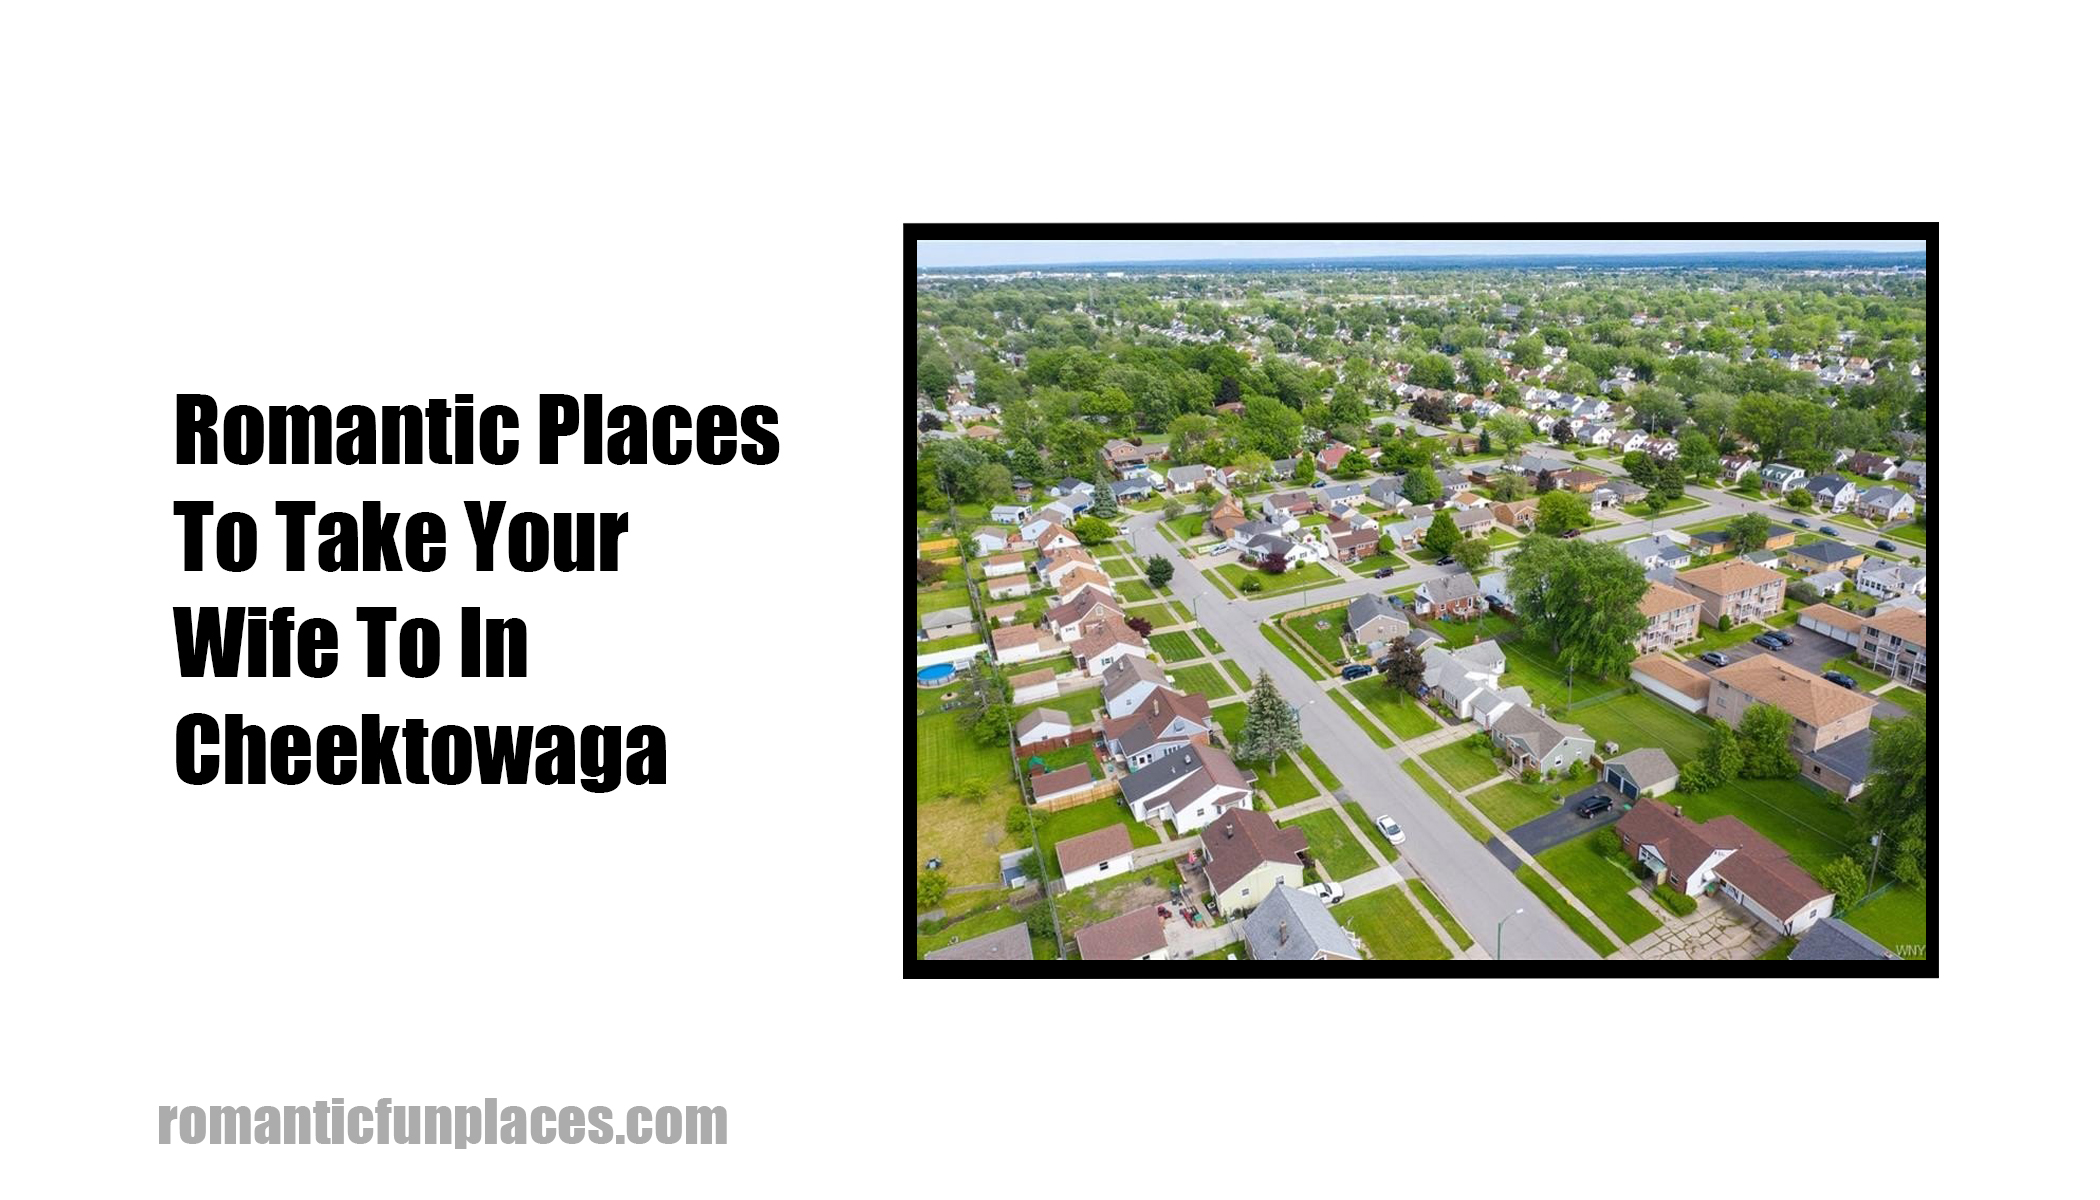 Romantic Places To Take Your Wife To In Cheektowaga